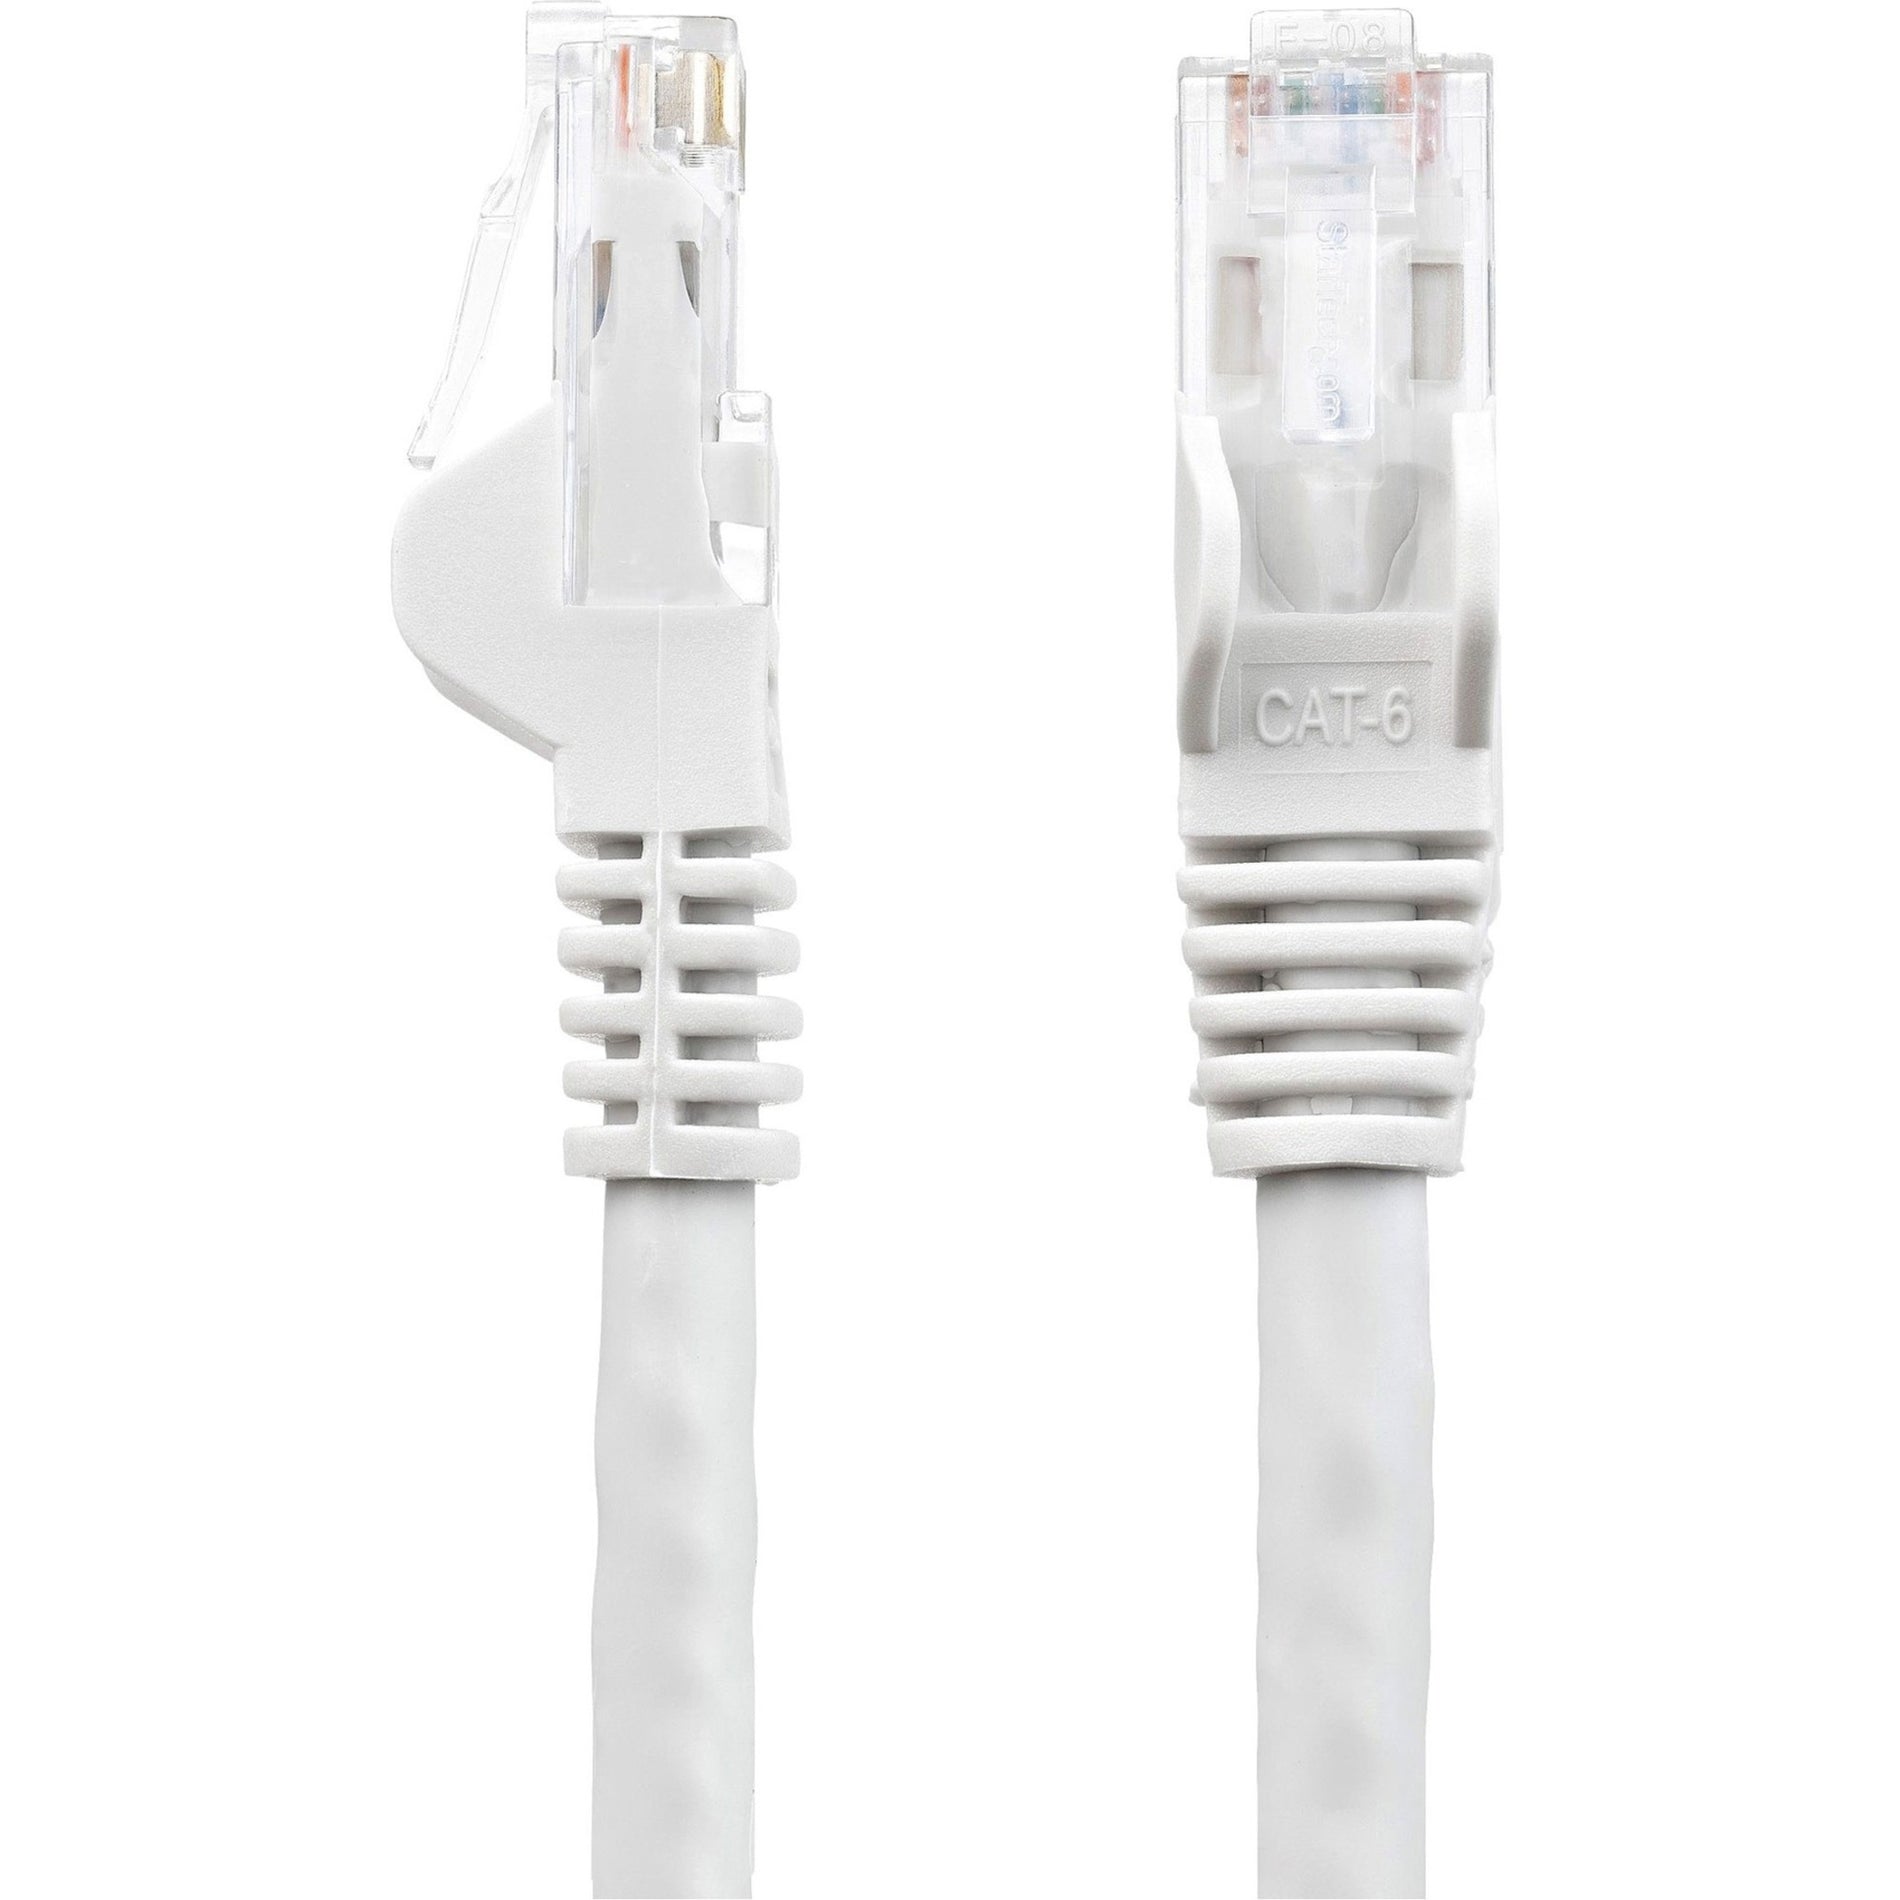 StarTech.com N6PATCH30WH Cat6 Patch Cable, 30ft White Ethernet Cable, Snagless RJ45 Connectors